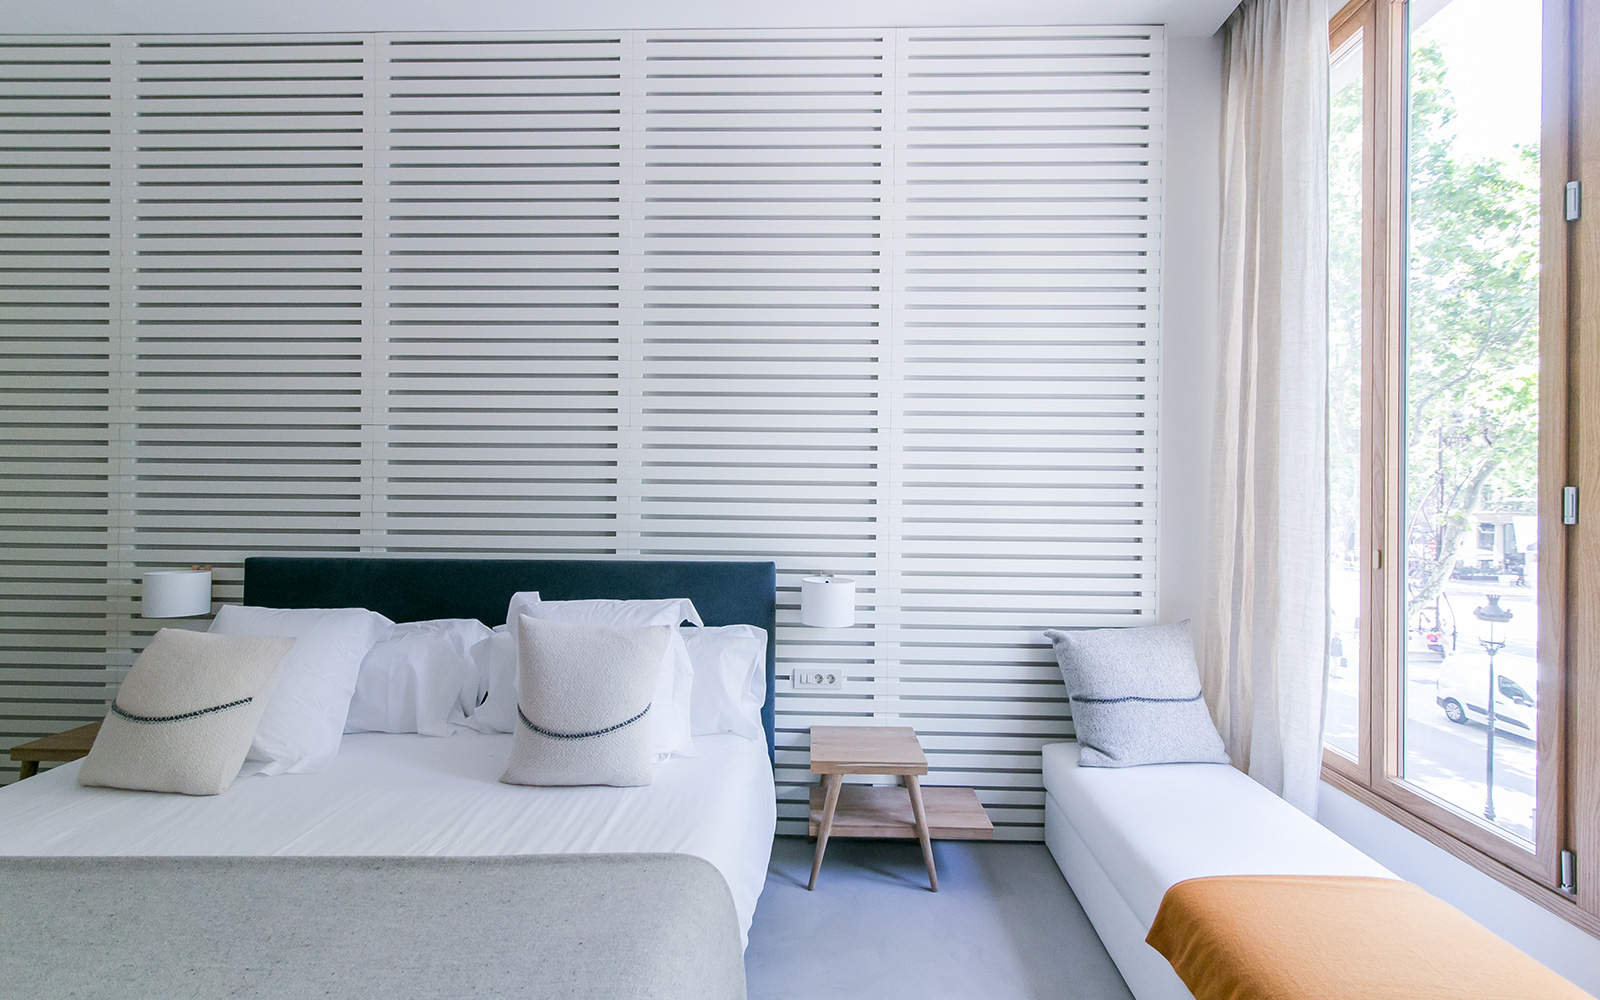 Barcelona's New Boutique Hotel is Inspired by 'The Royal Tenenbaums'